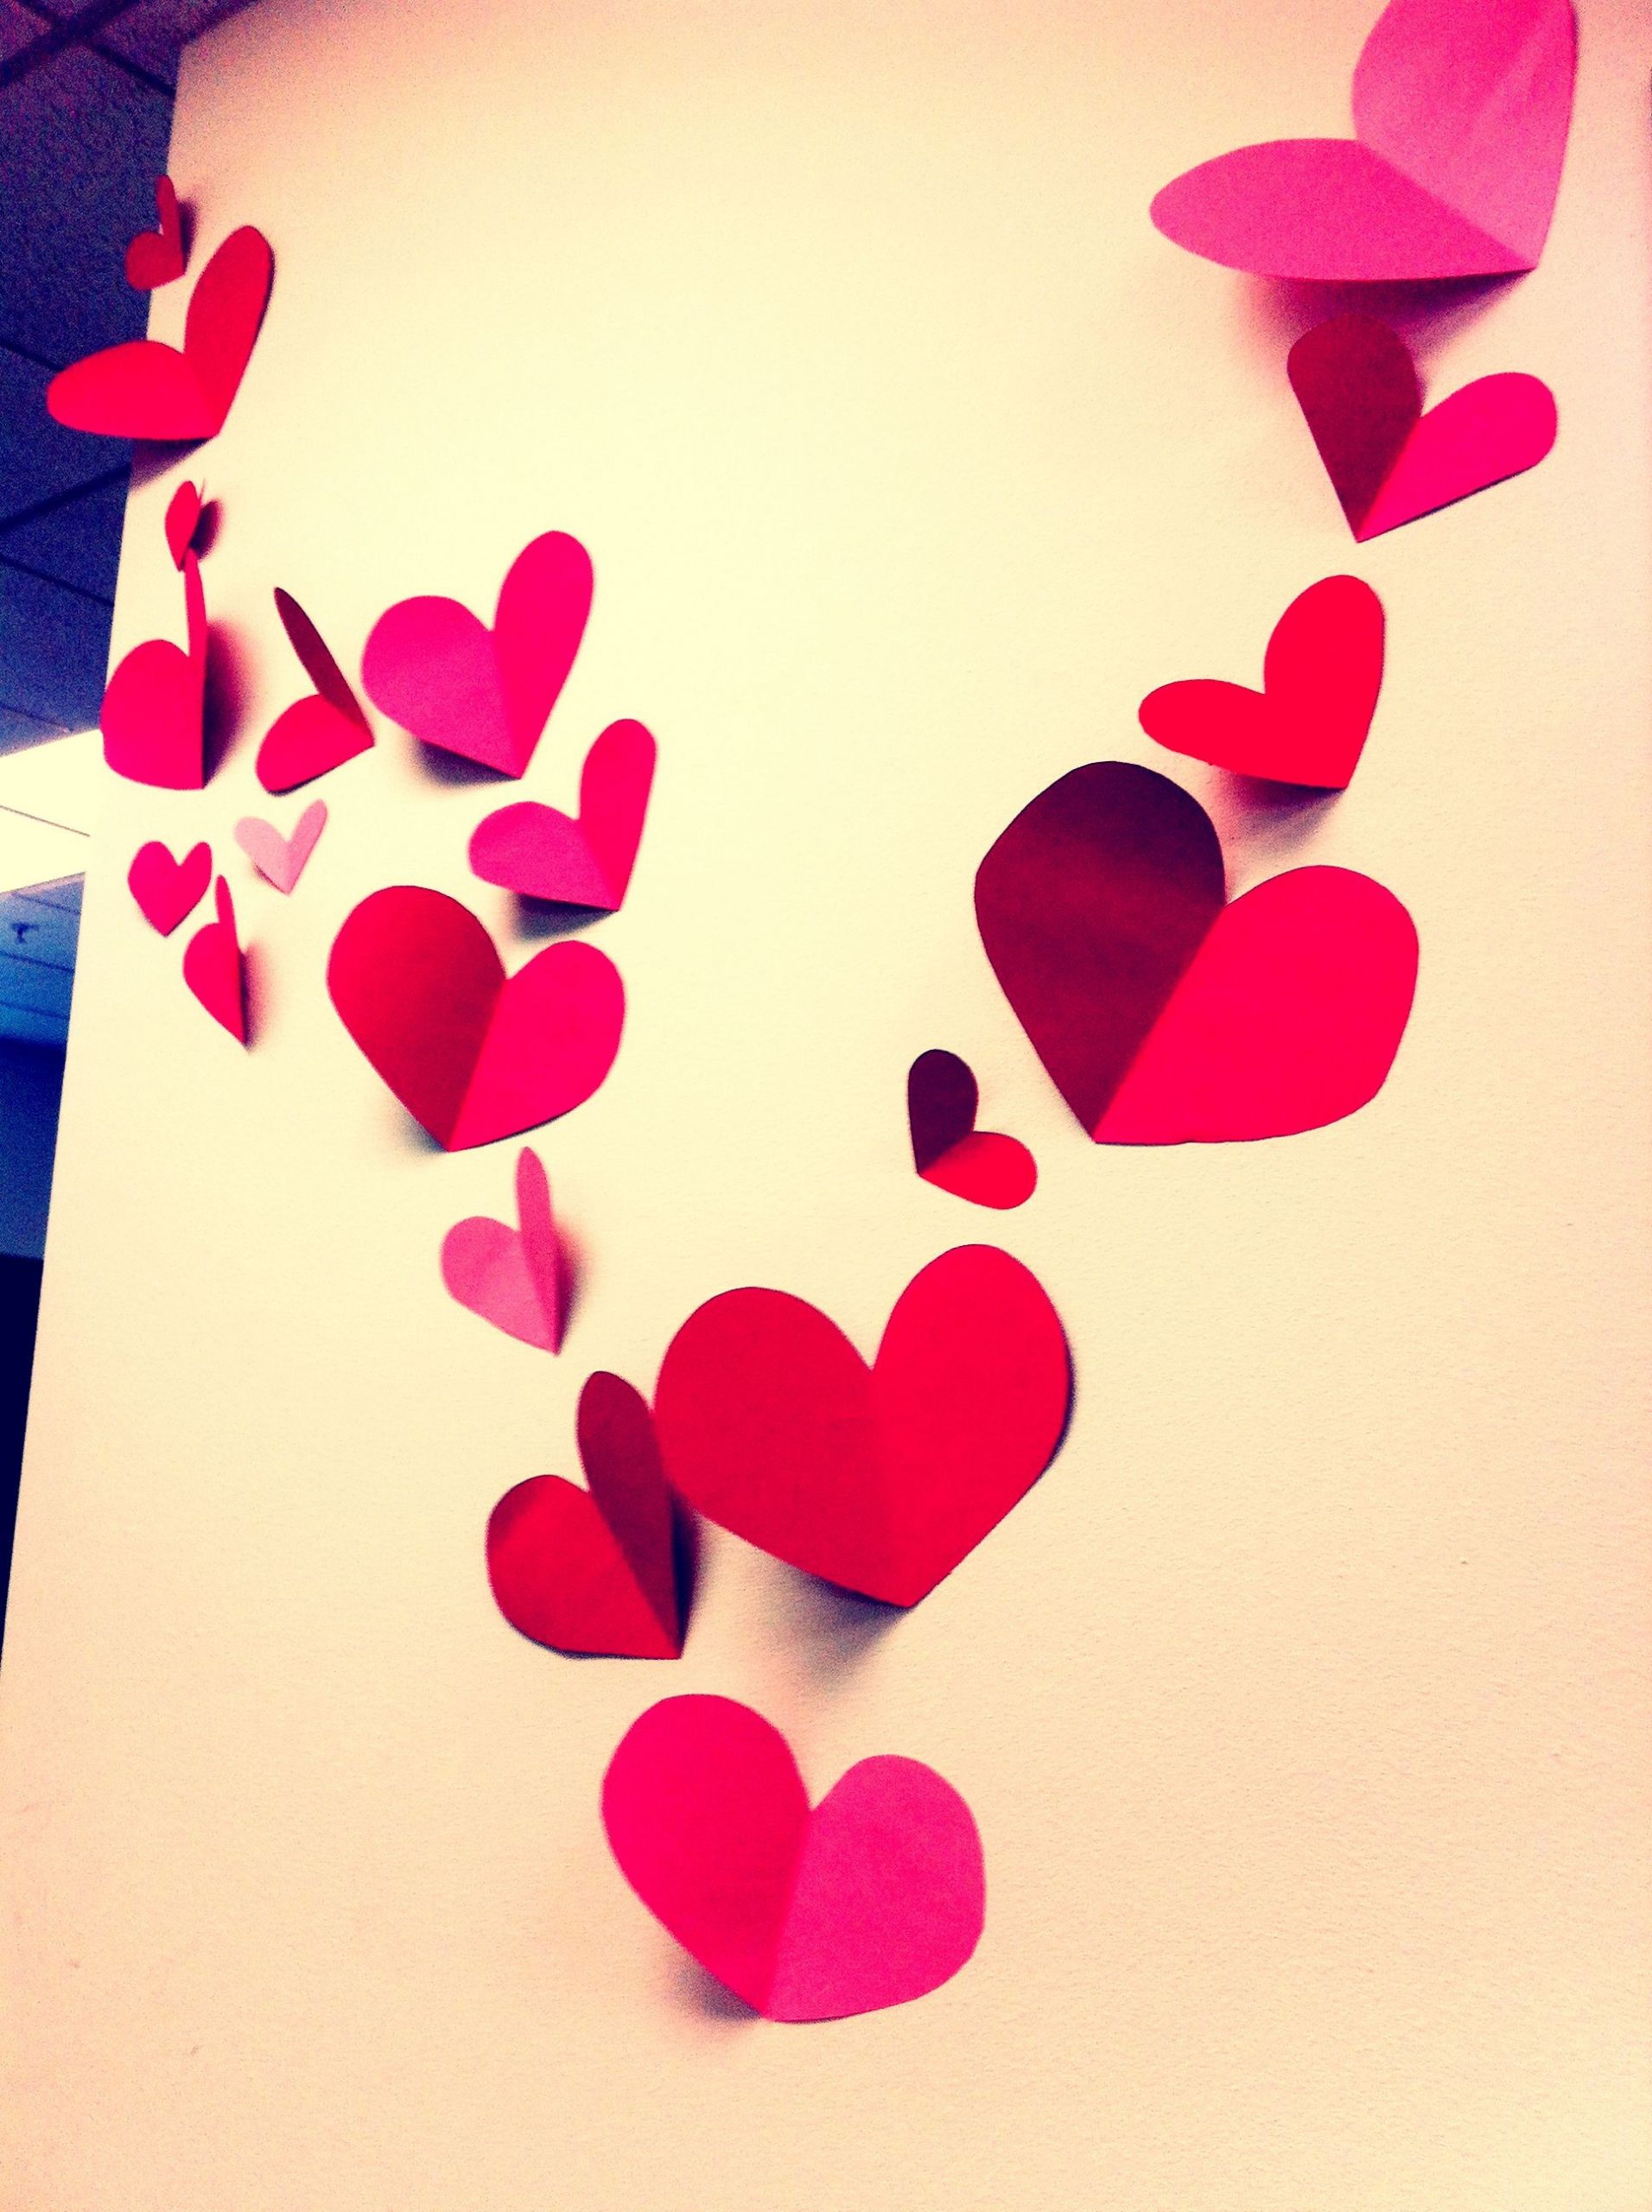 Office Valentines Day Ideas
 Valentines Decorations to brighten any office